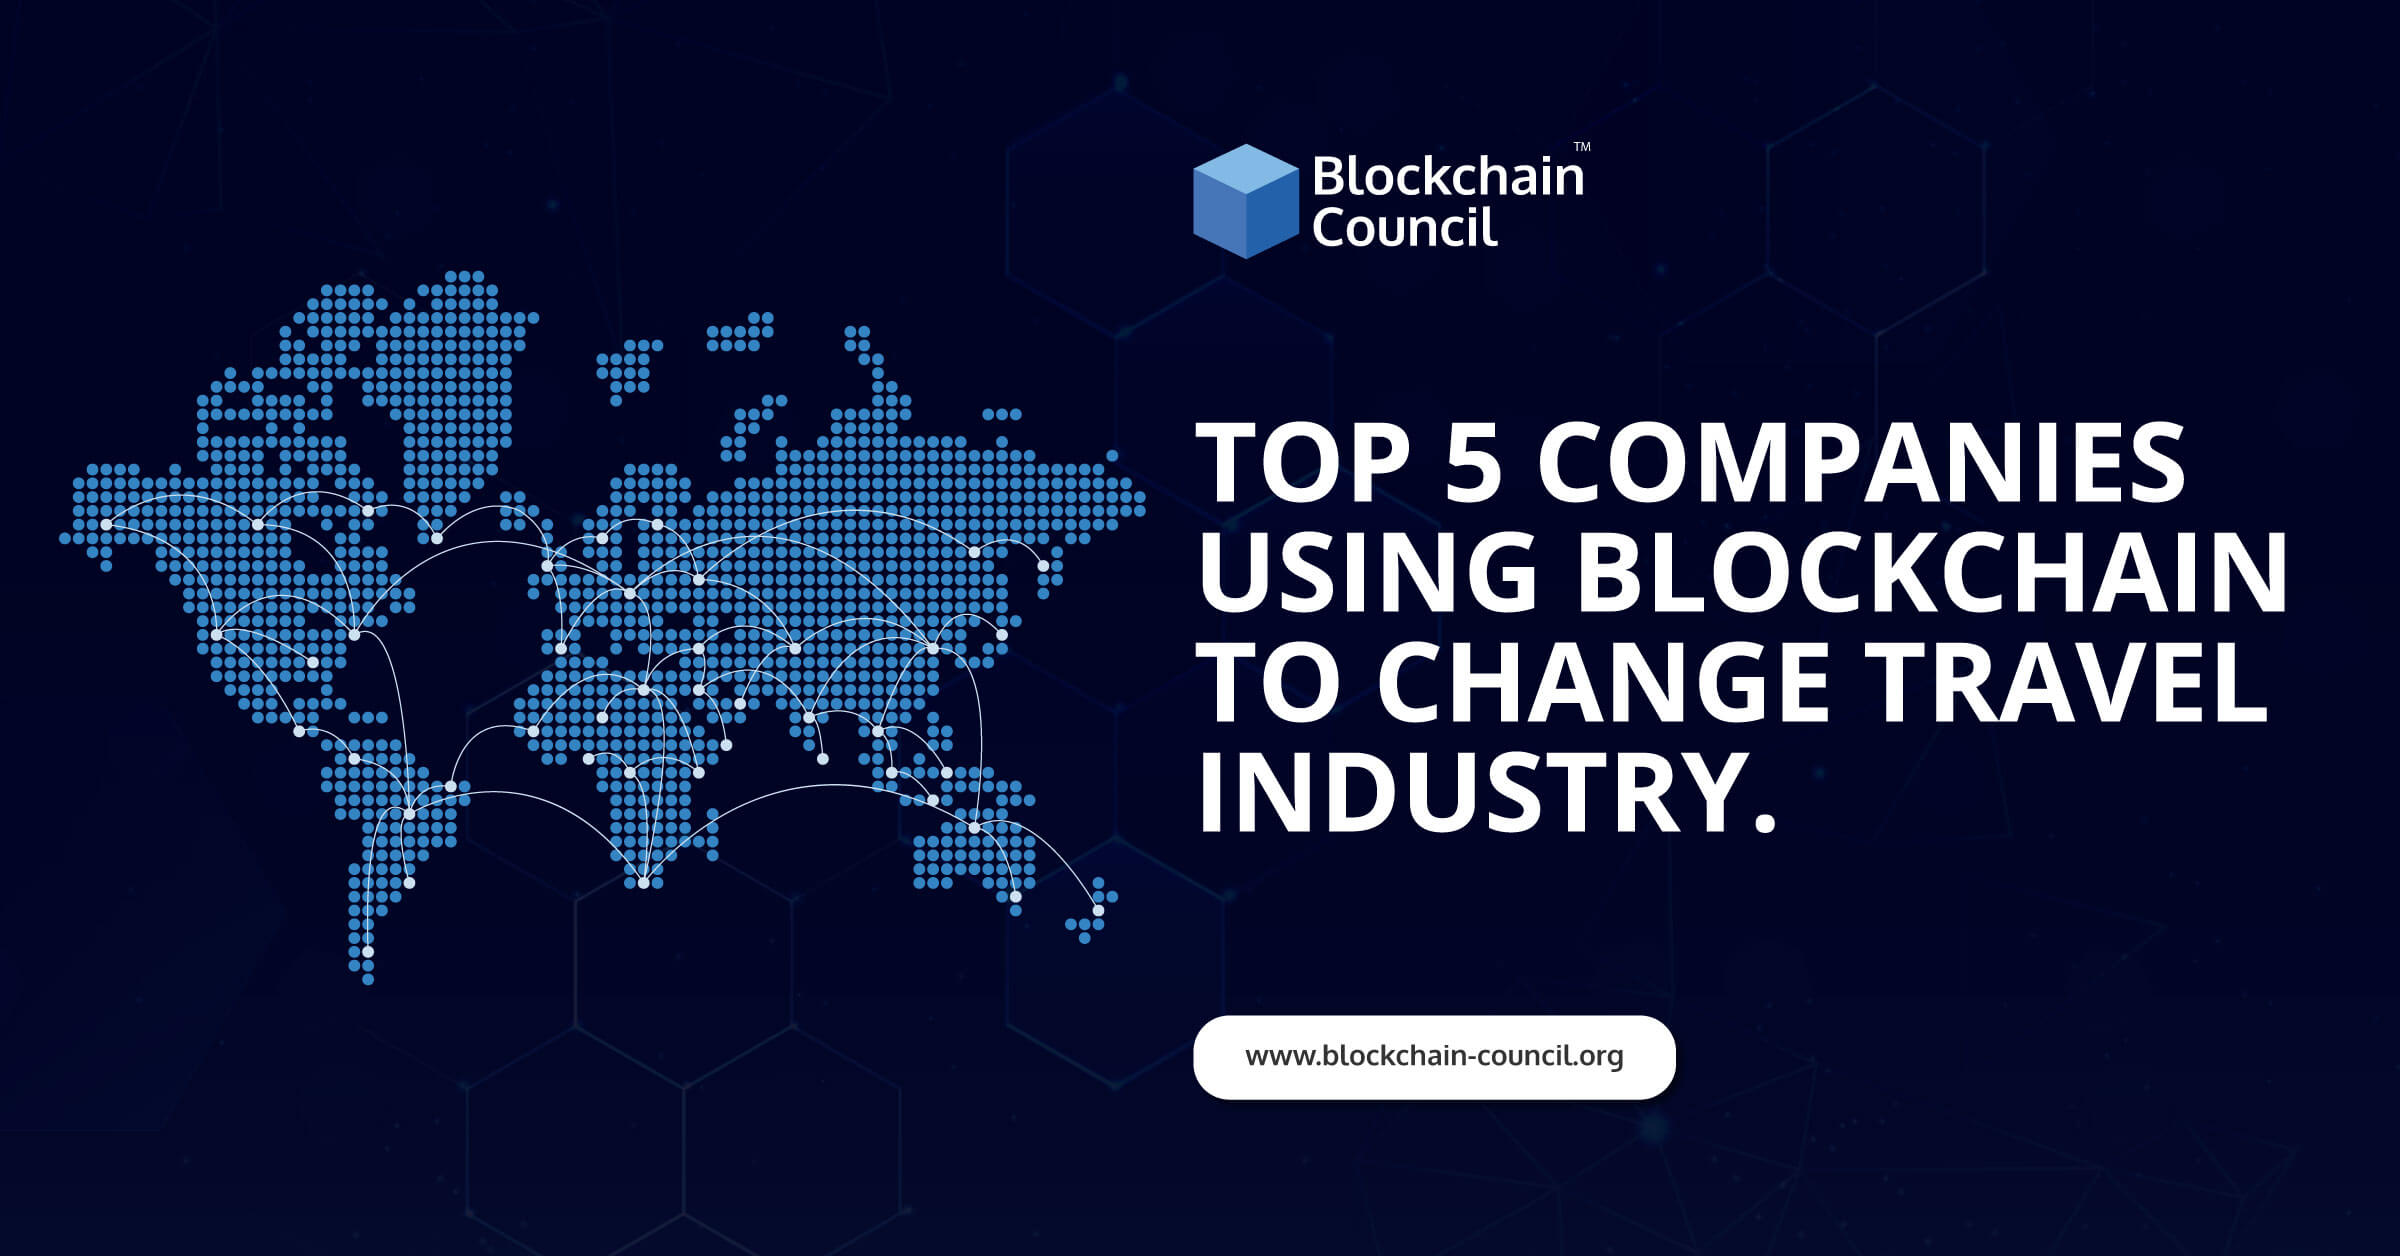 Top 5 Companies Using Blockchain to Change the Travel Industry